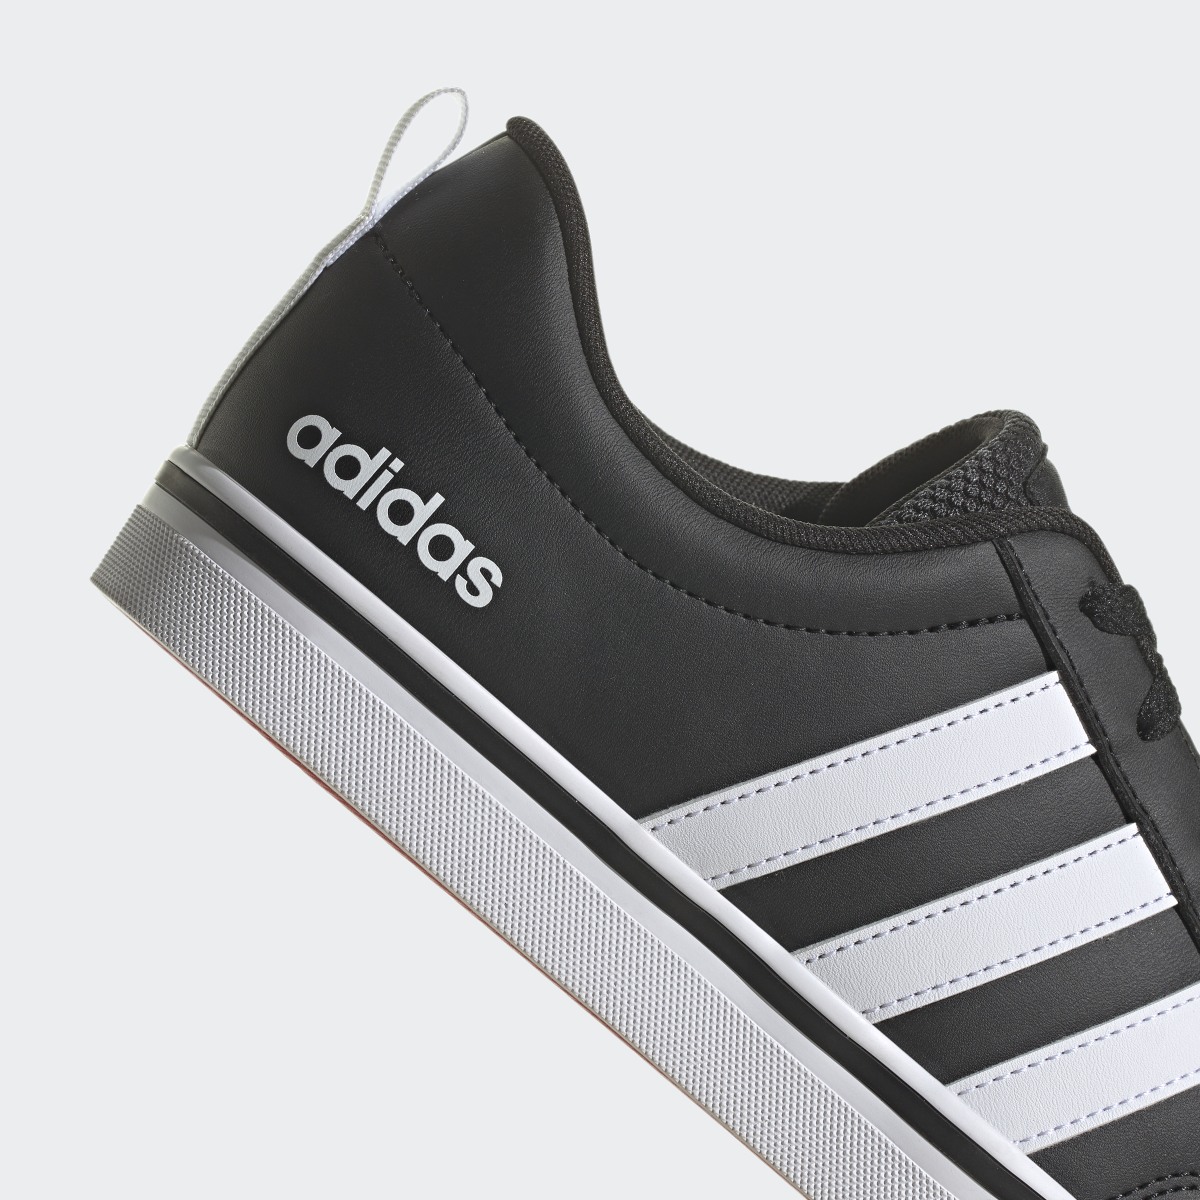 Adidas VS Pace 2.0 Shoes. 9